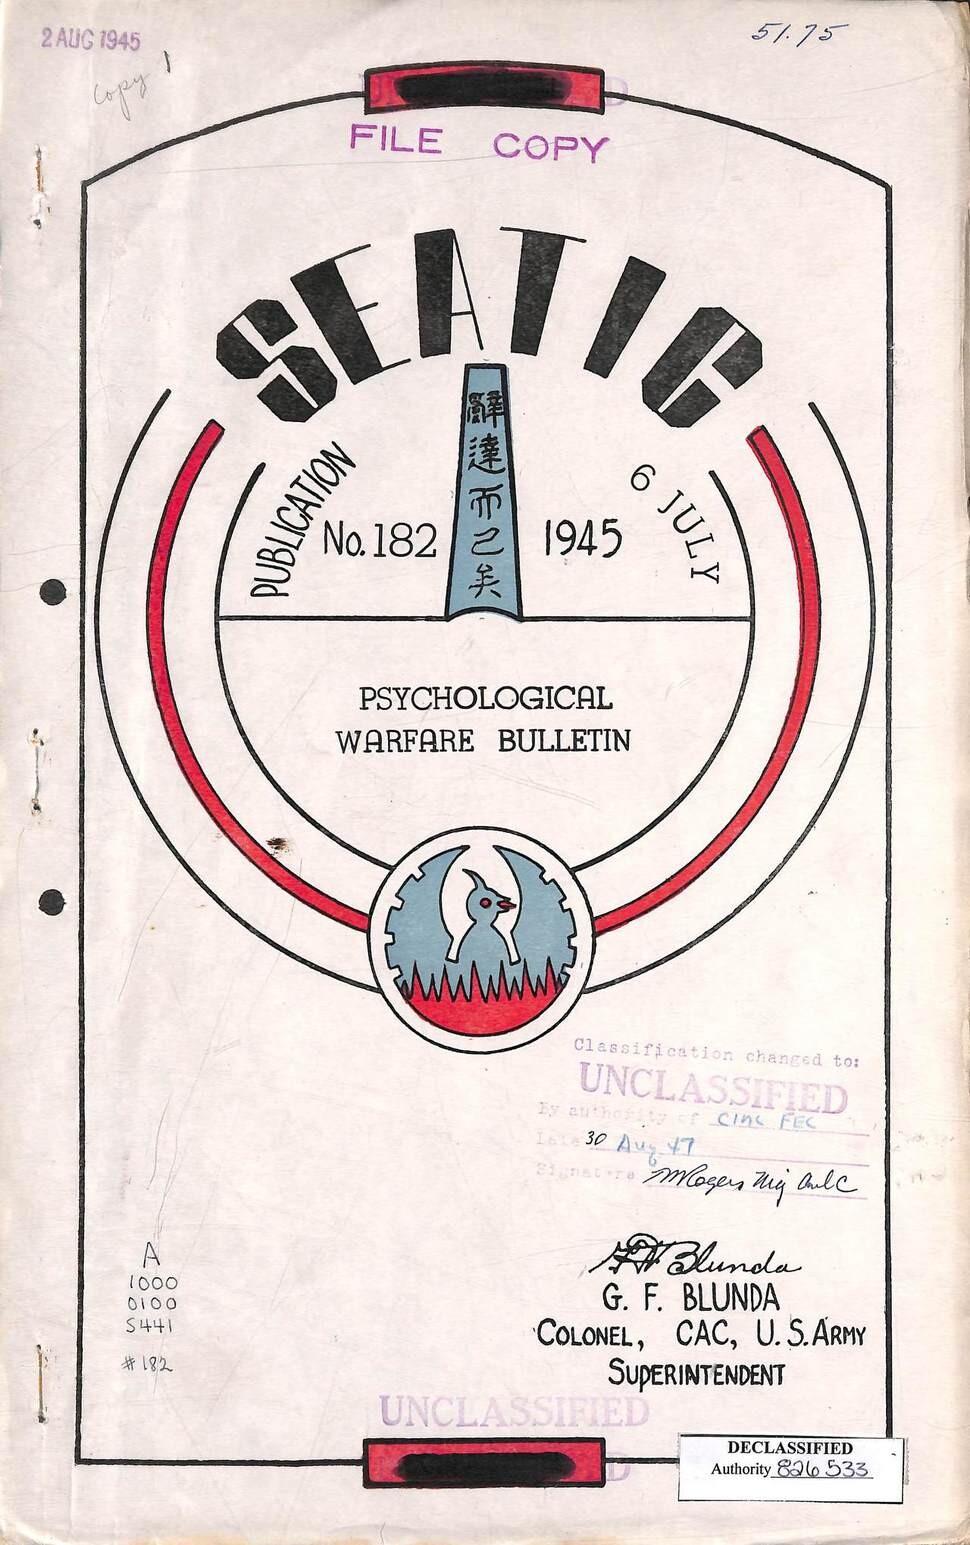 Cover of Southeast Asia Translation and Interrogation Center (SEATIC) Psychological Warfare Bulletin No. 182. Provided by National Institute of Korean History.